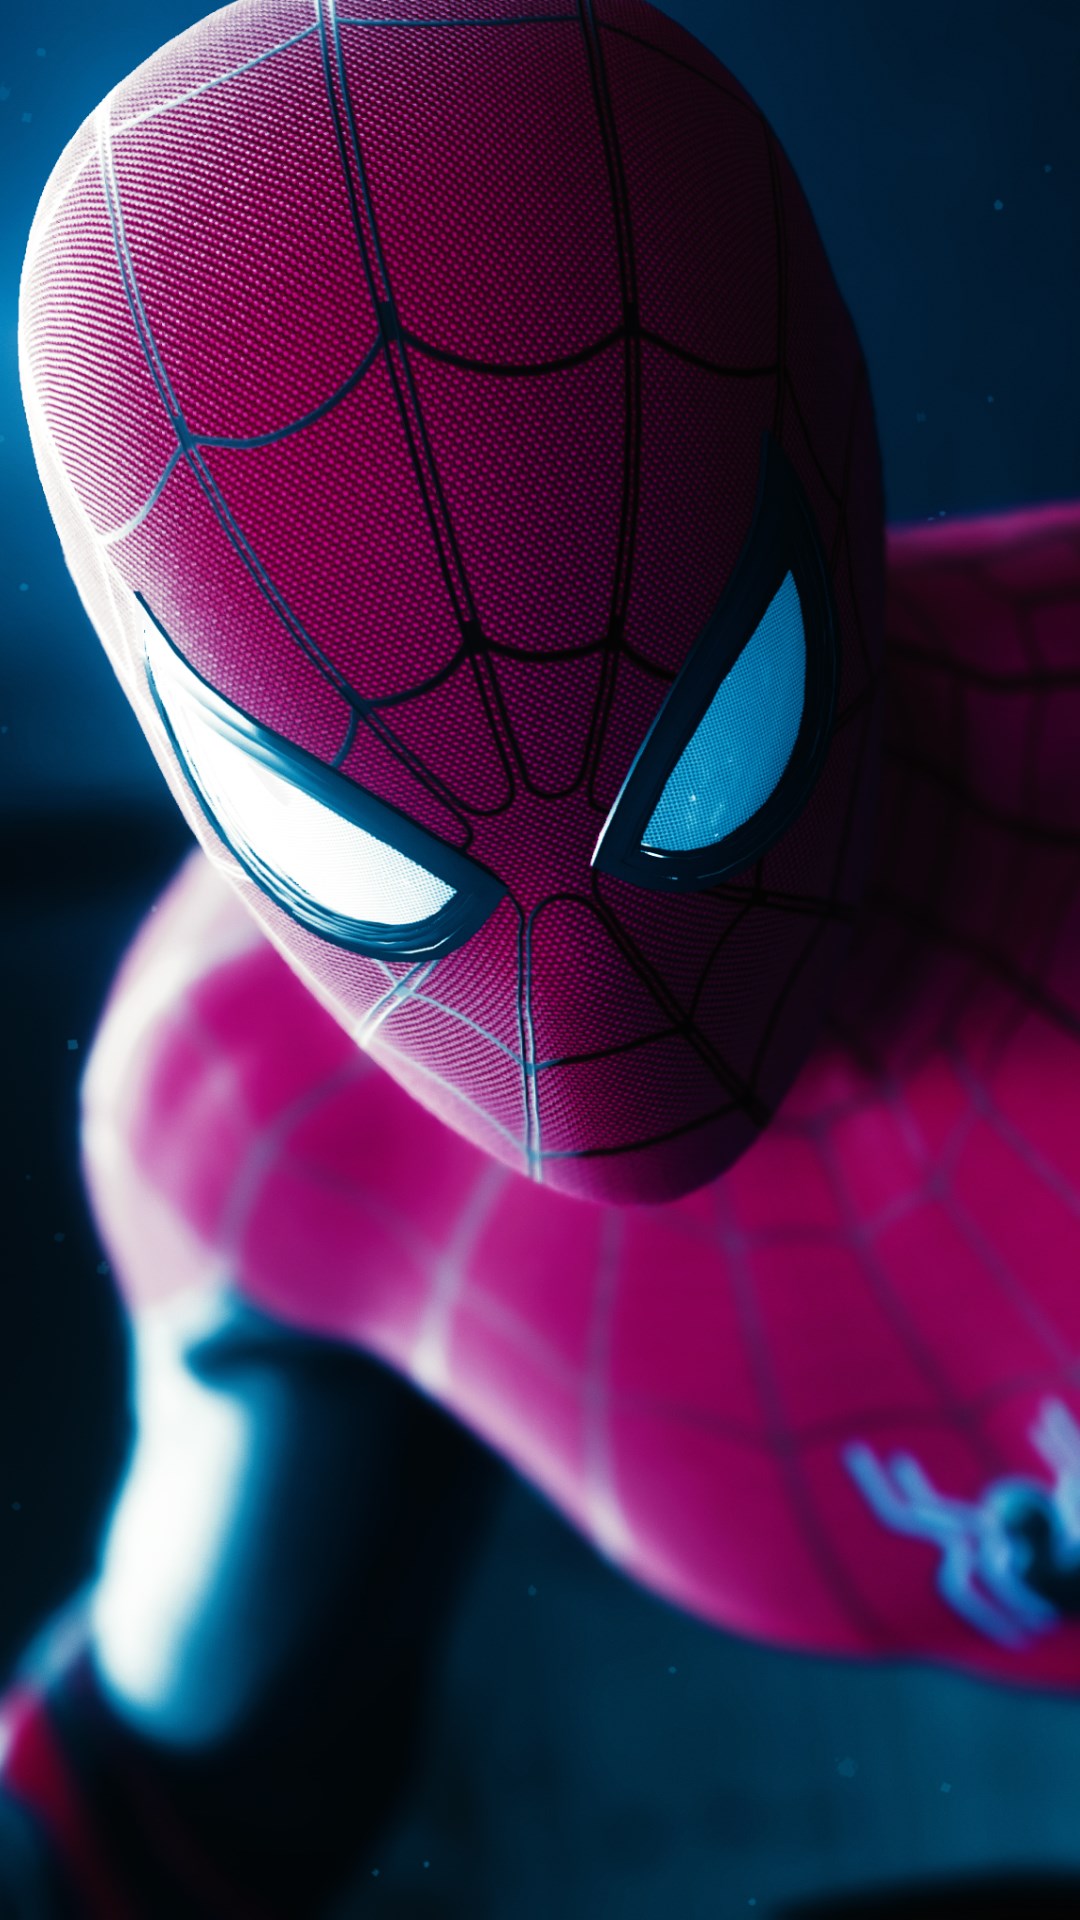 Download wallpaper: The Game: Spider man far from home 1080x1920